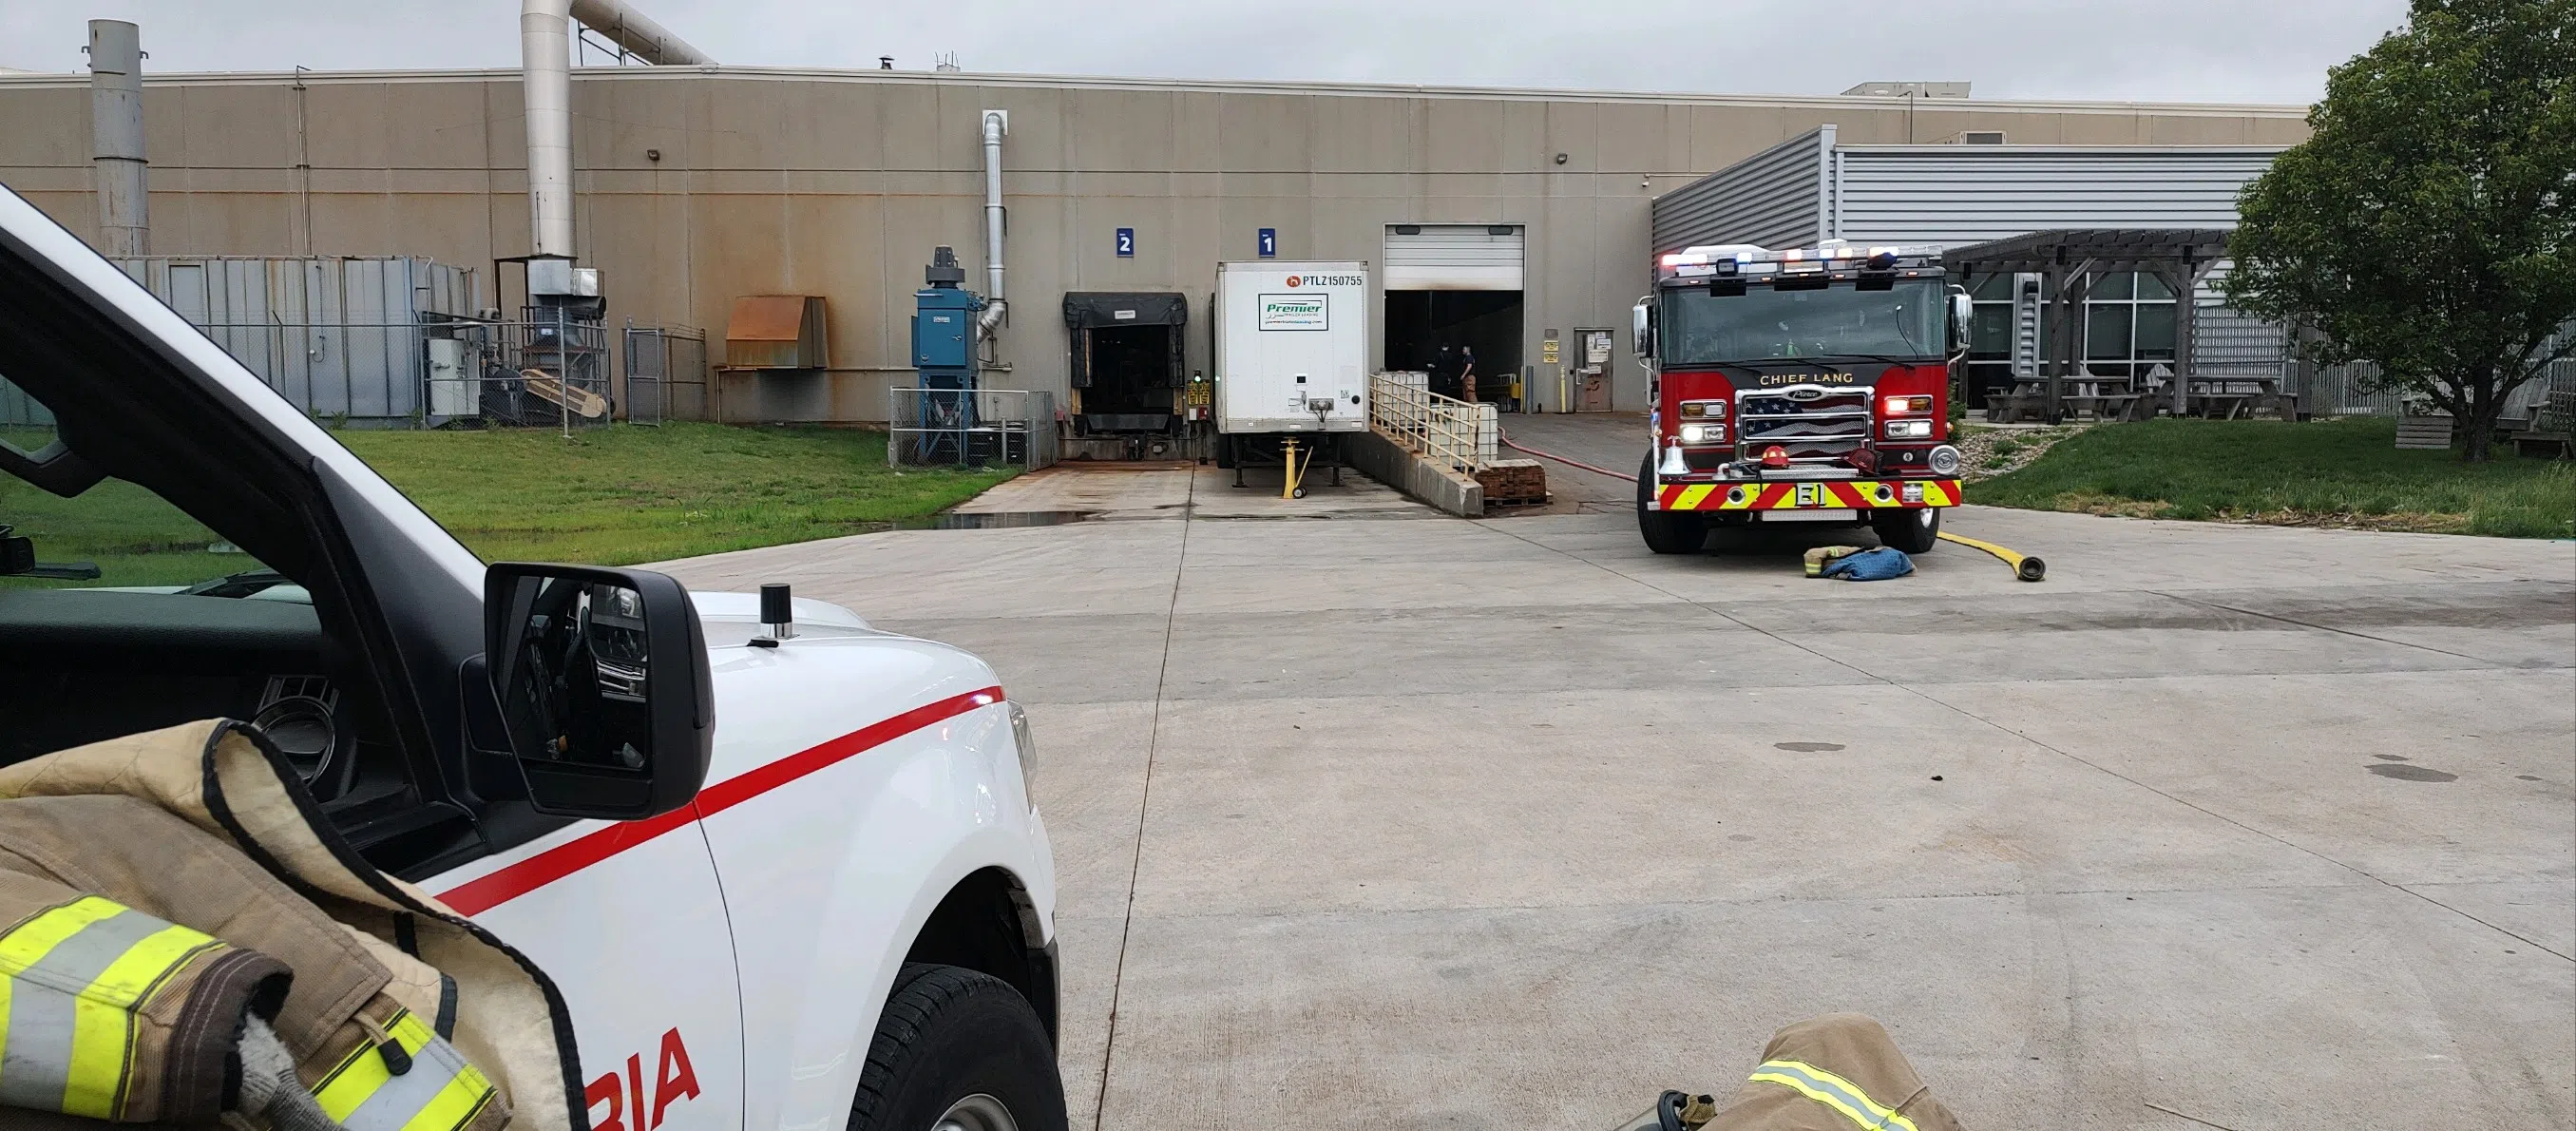 Emporia Fire reports smoldering debris pile triggered evacuation and EFD response at Michelin facilities Monday